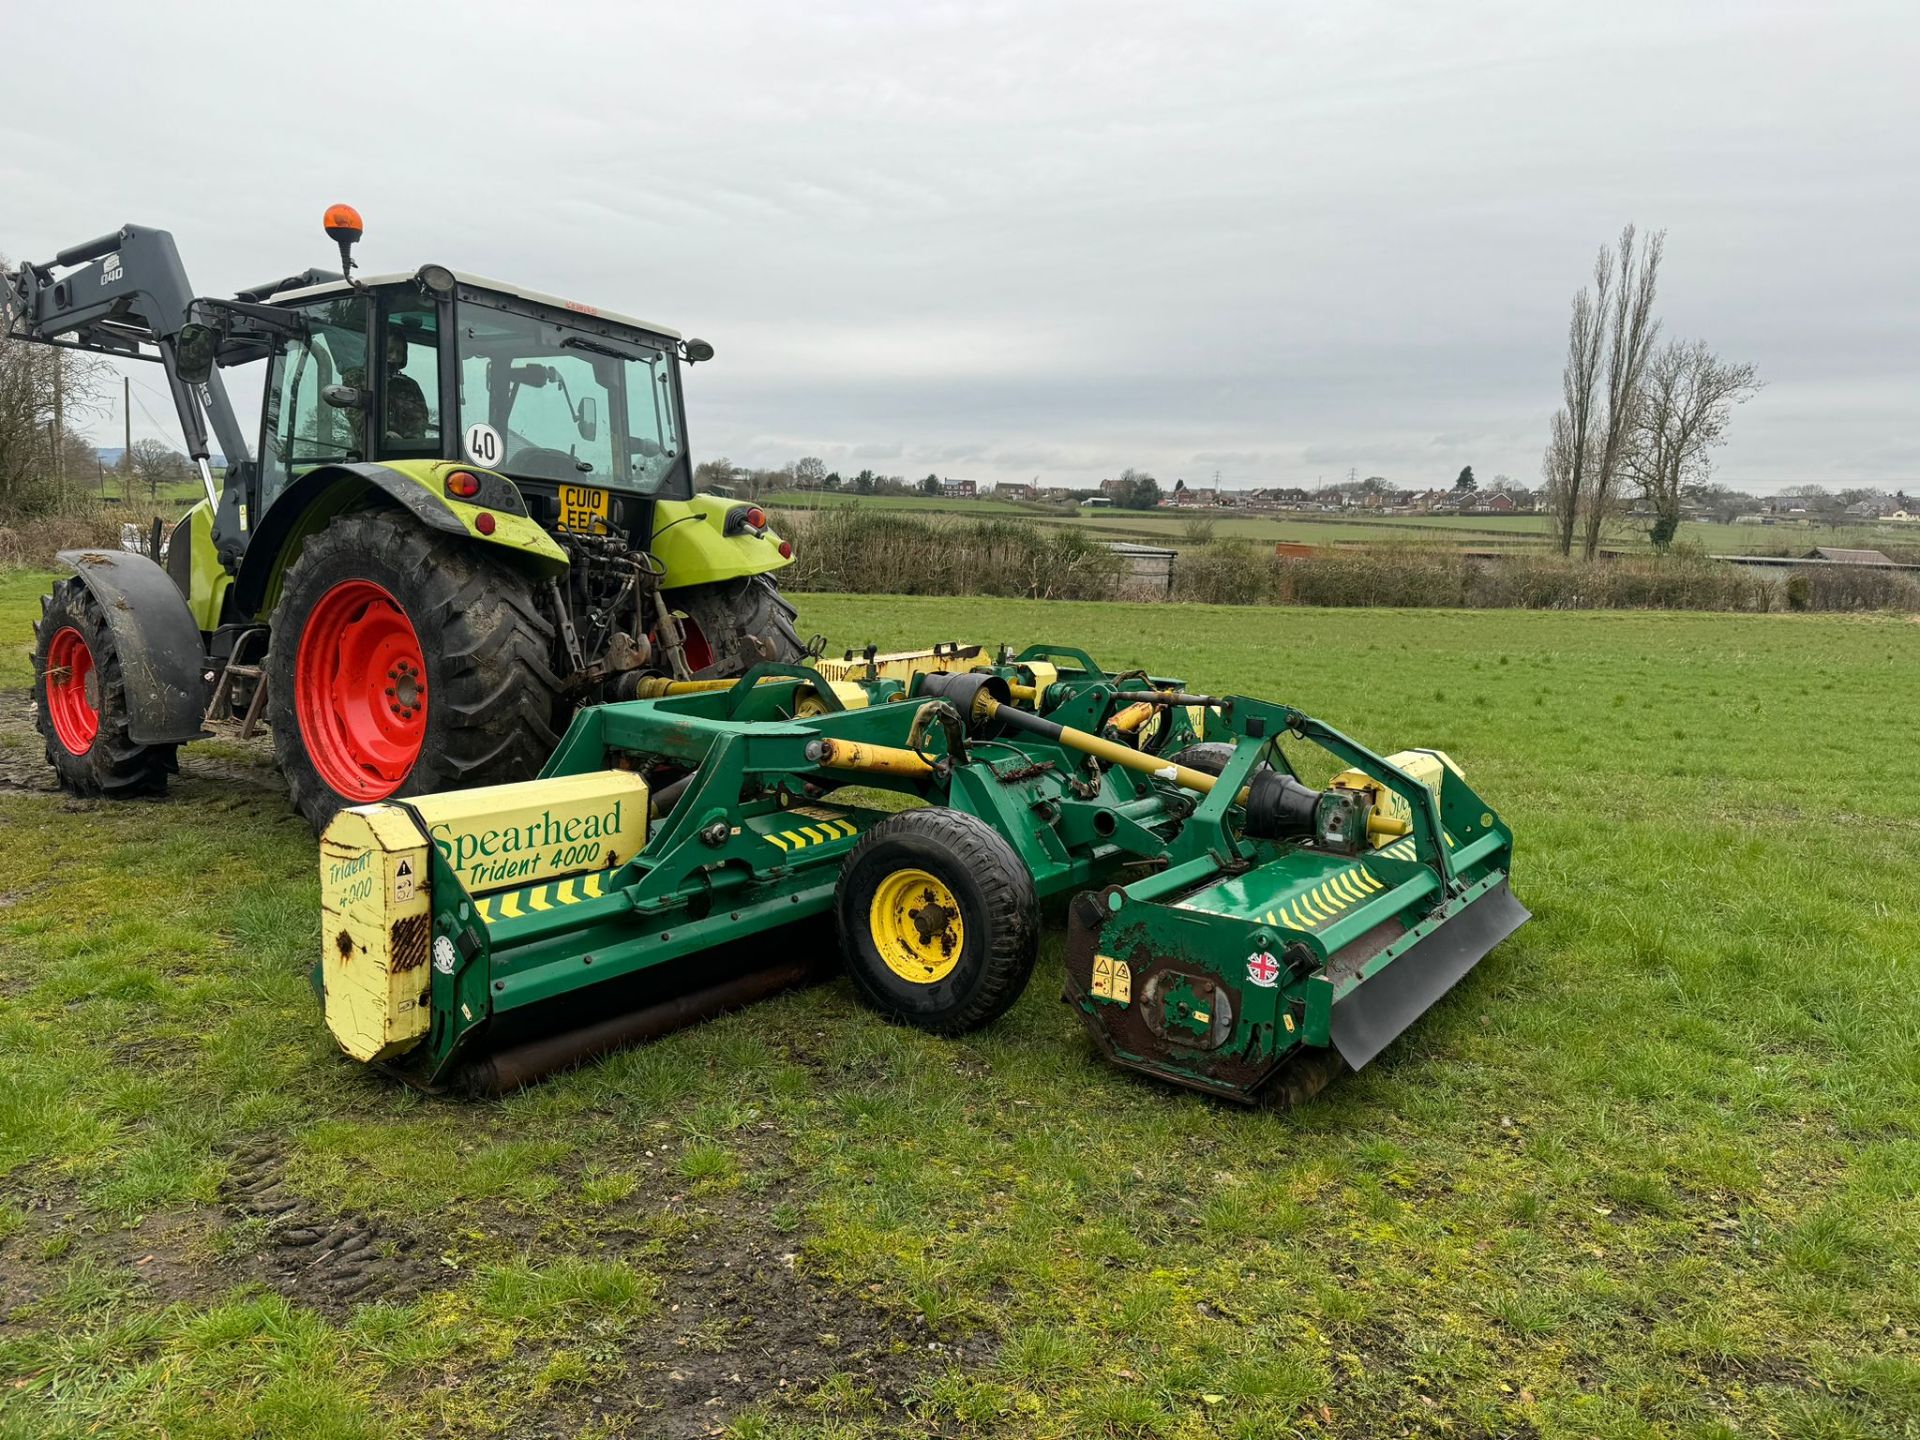 SPEARHEAD TRIDENT 4000 3 GANG TOWBEHIND FLAIL MOWER *PLUS VAT* - Image 8 of 12